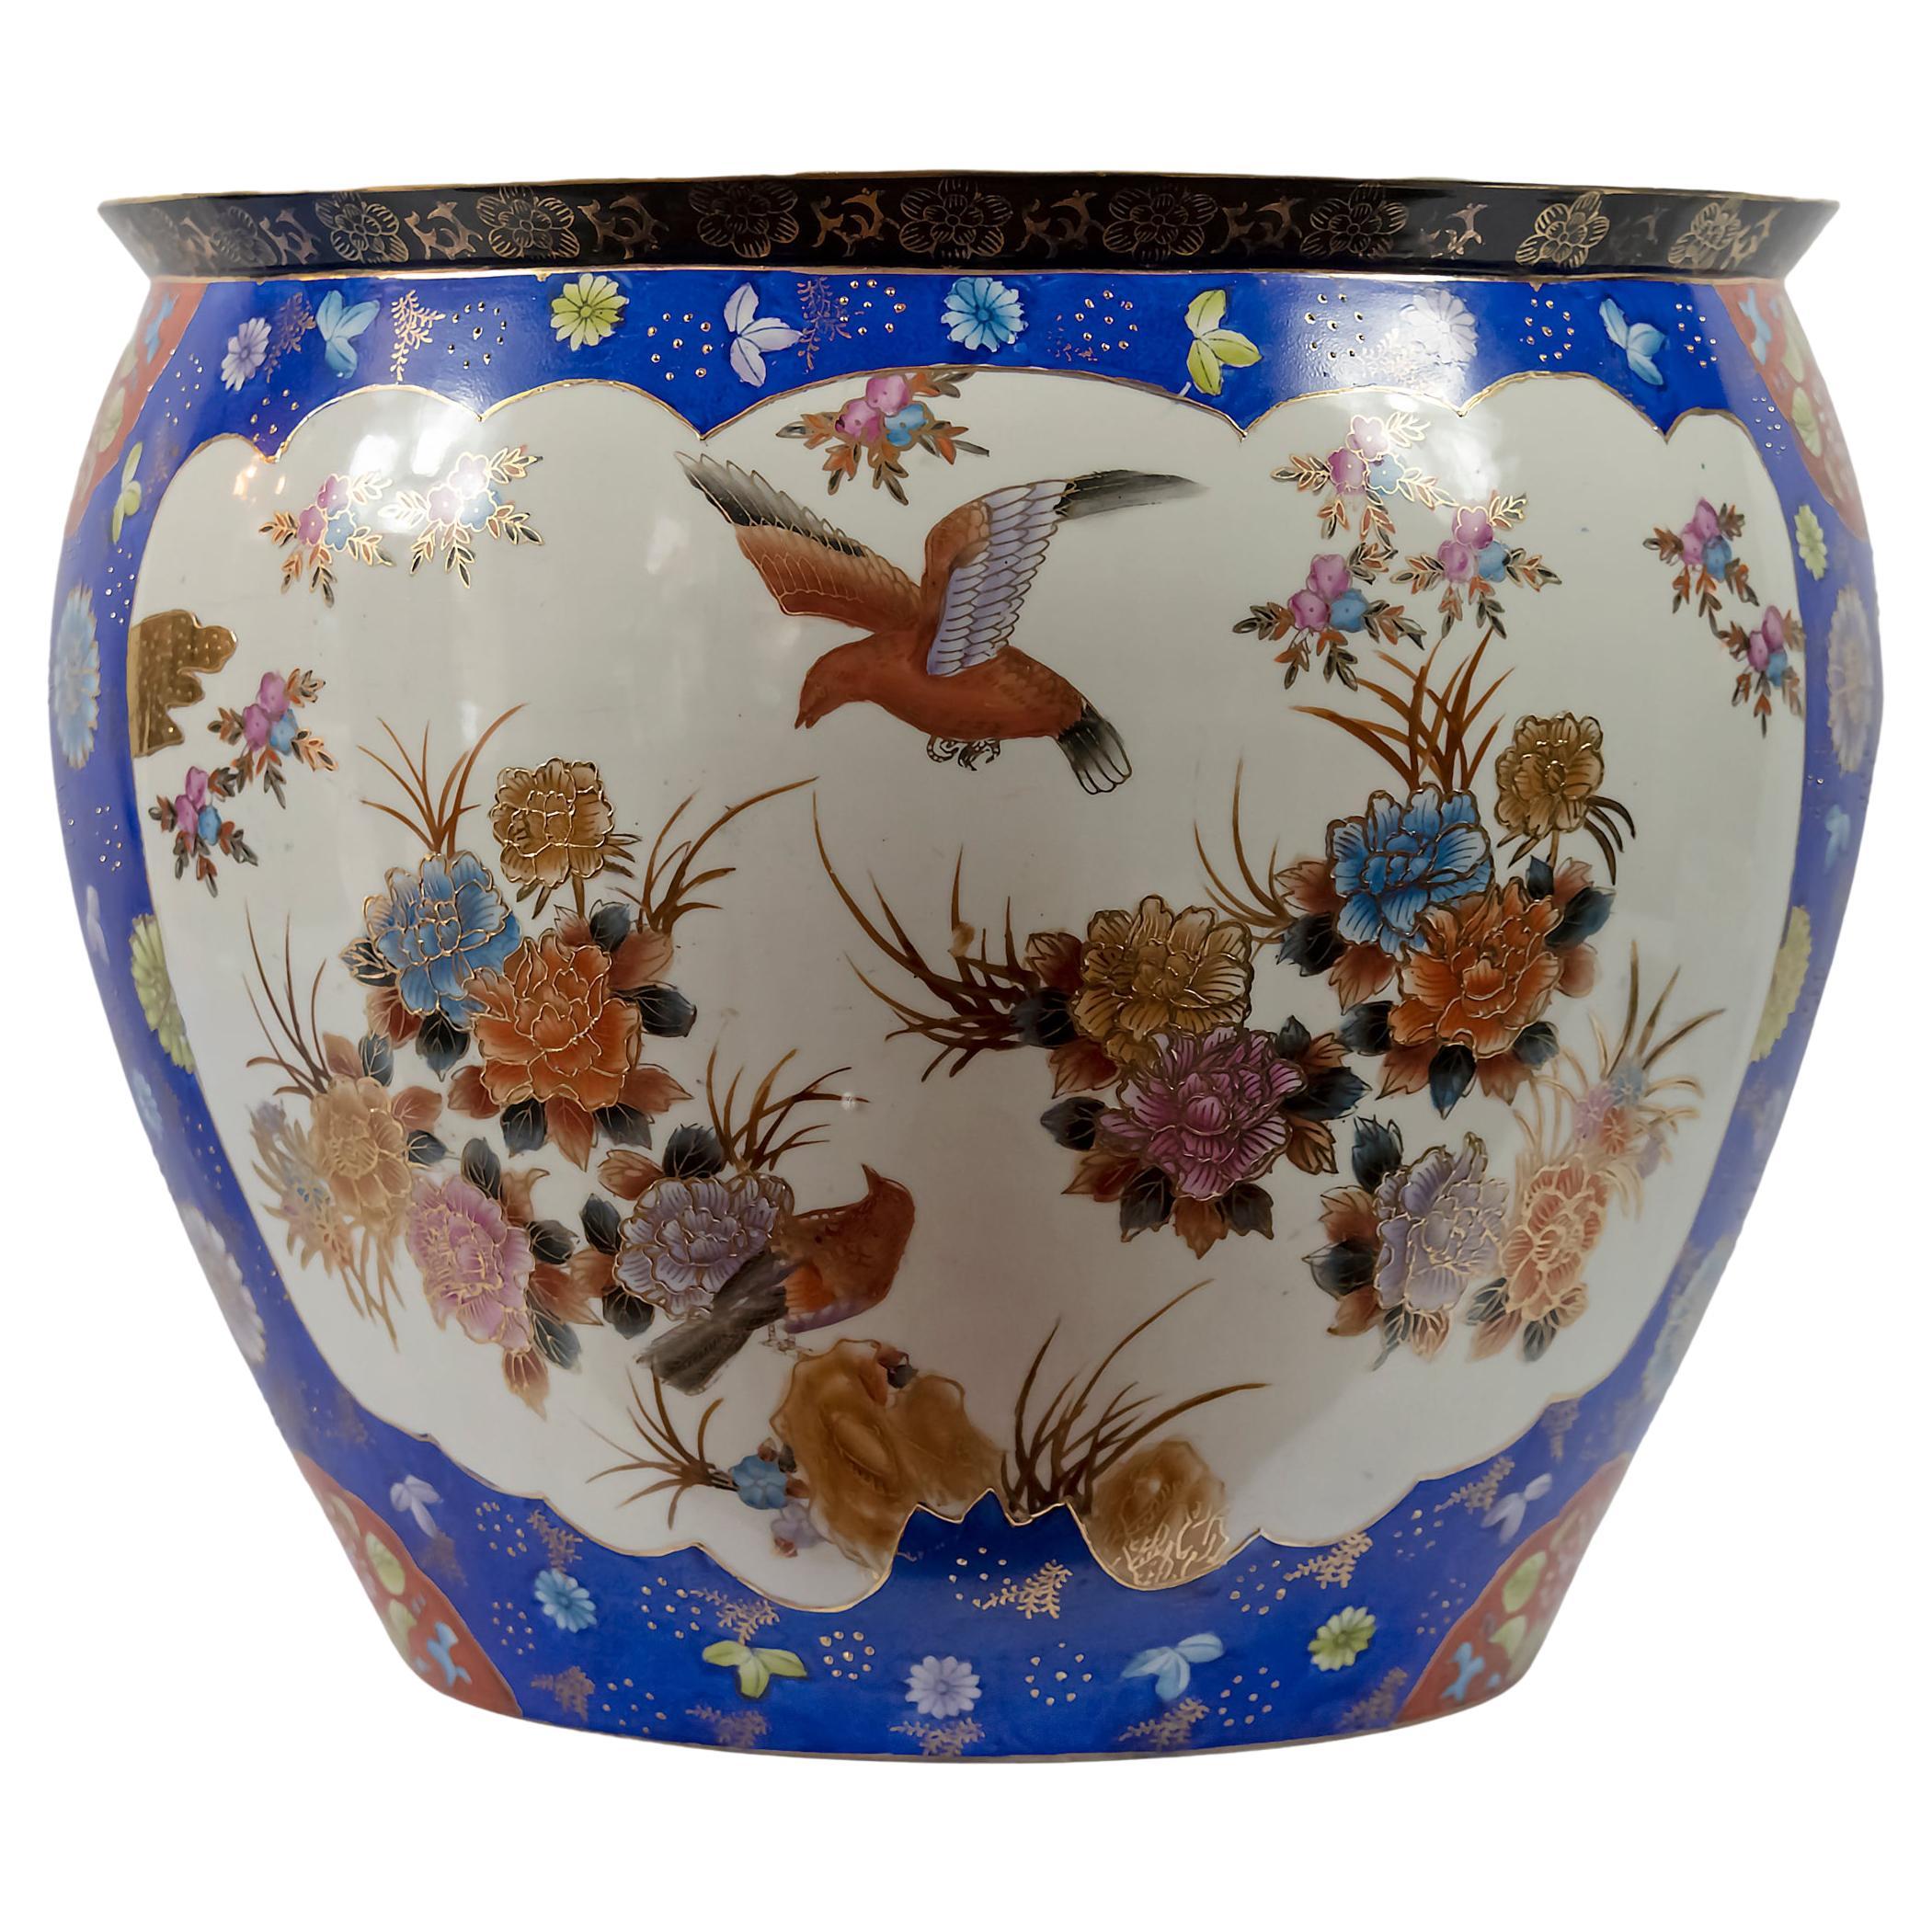 Large Chinese ceramic planter pot fish basin with hand painted birds, flowers as well as the inside with aquatic plants and fish painted in many colors.
Approx. 12 kg.
 